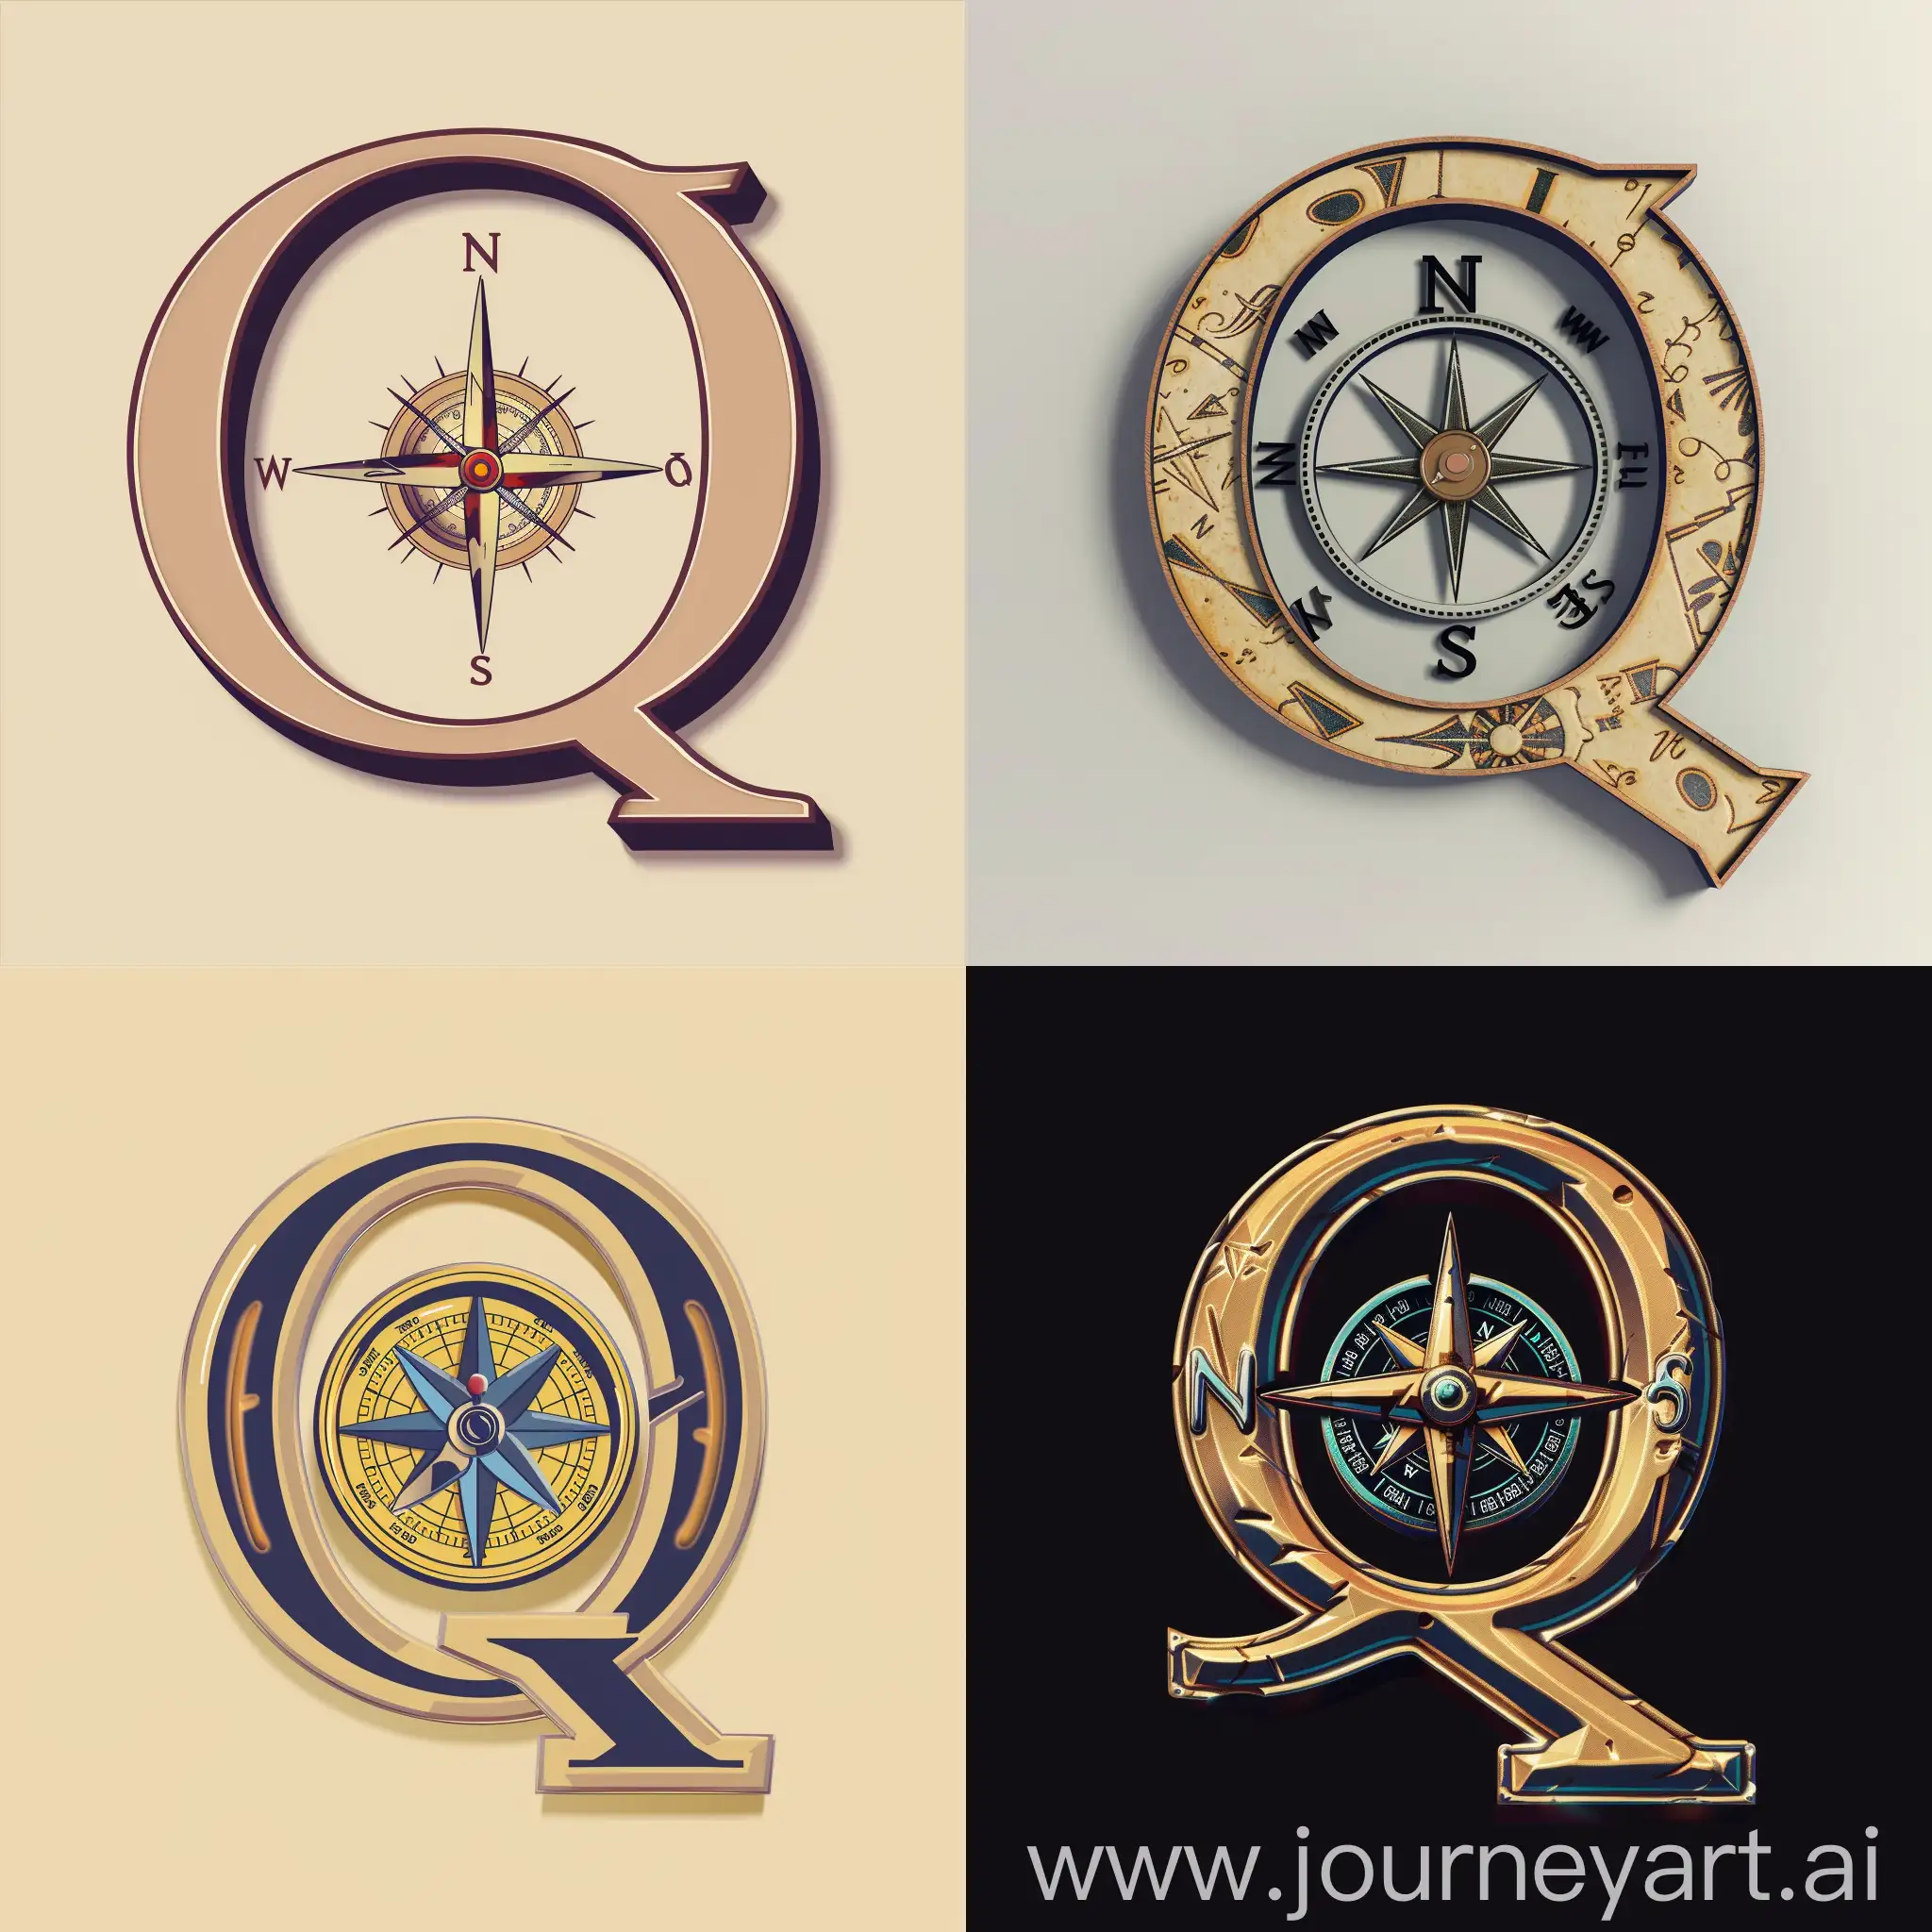 A stylized uppercase letter Q with a modern style compass inside it